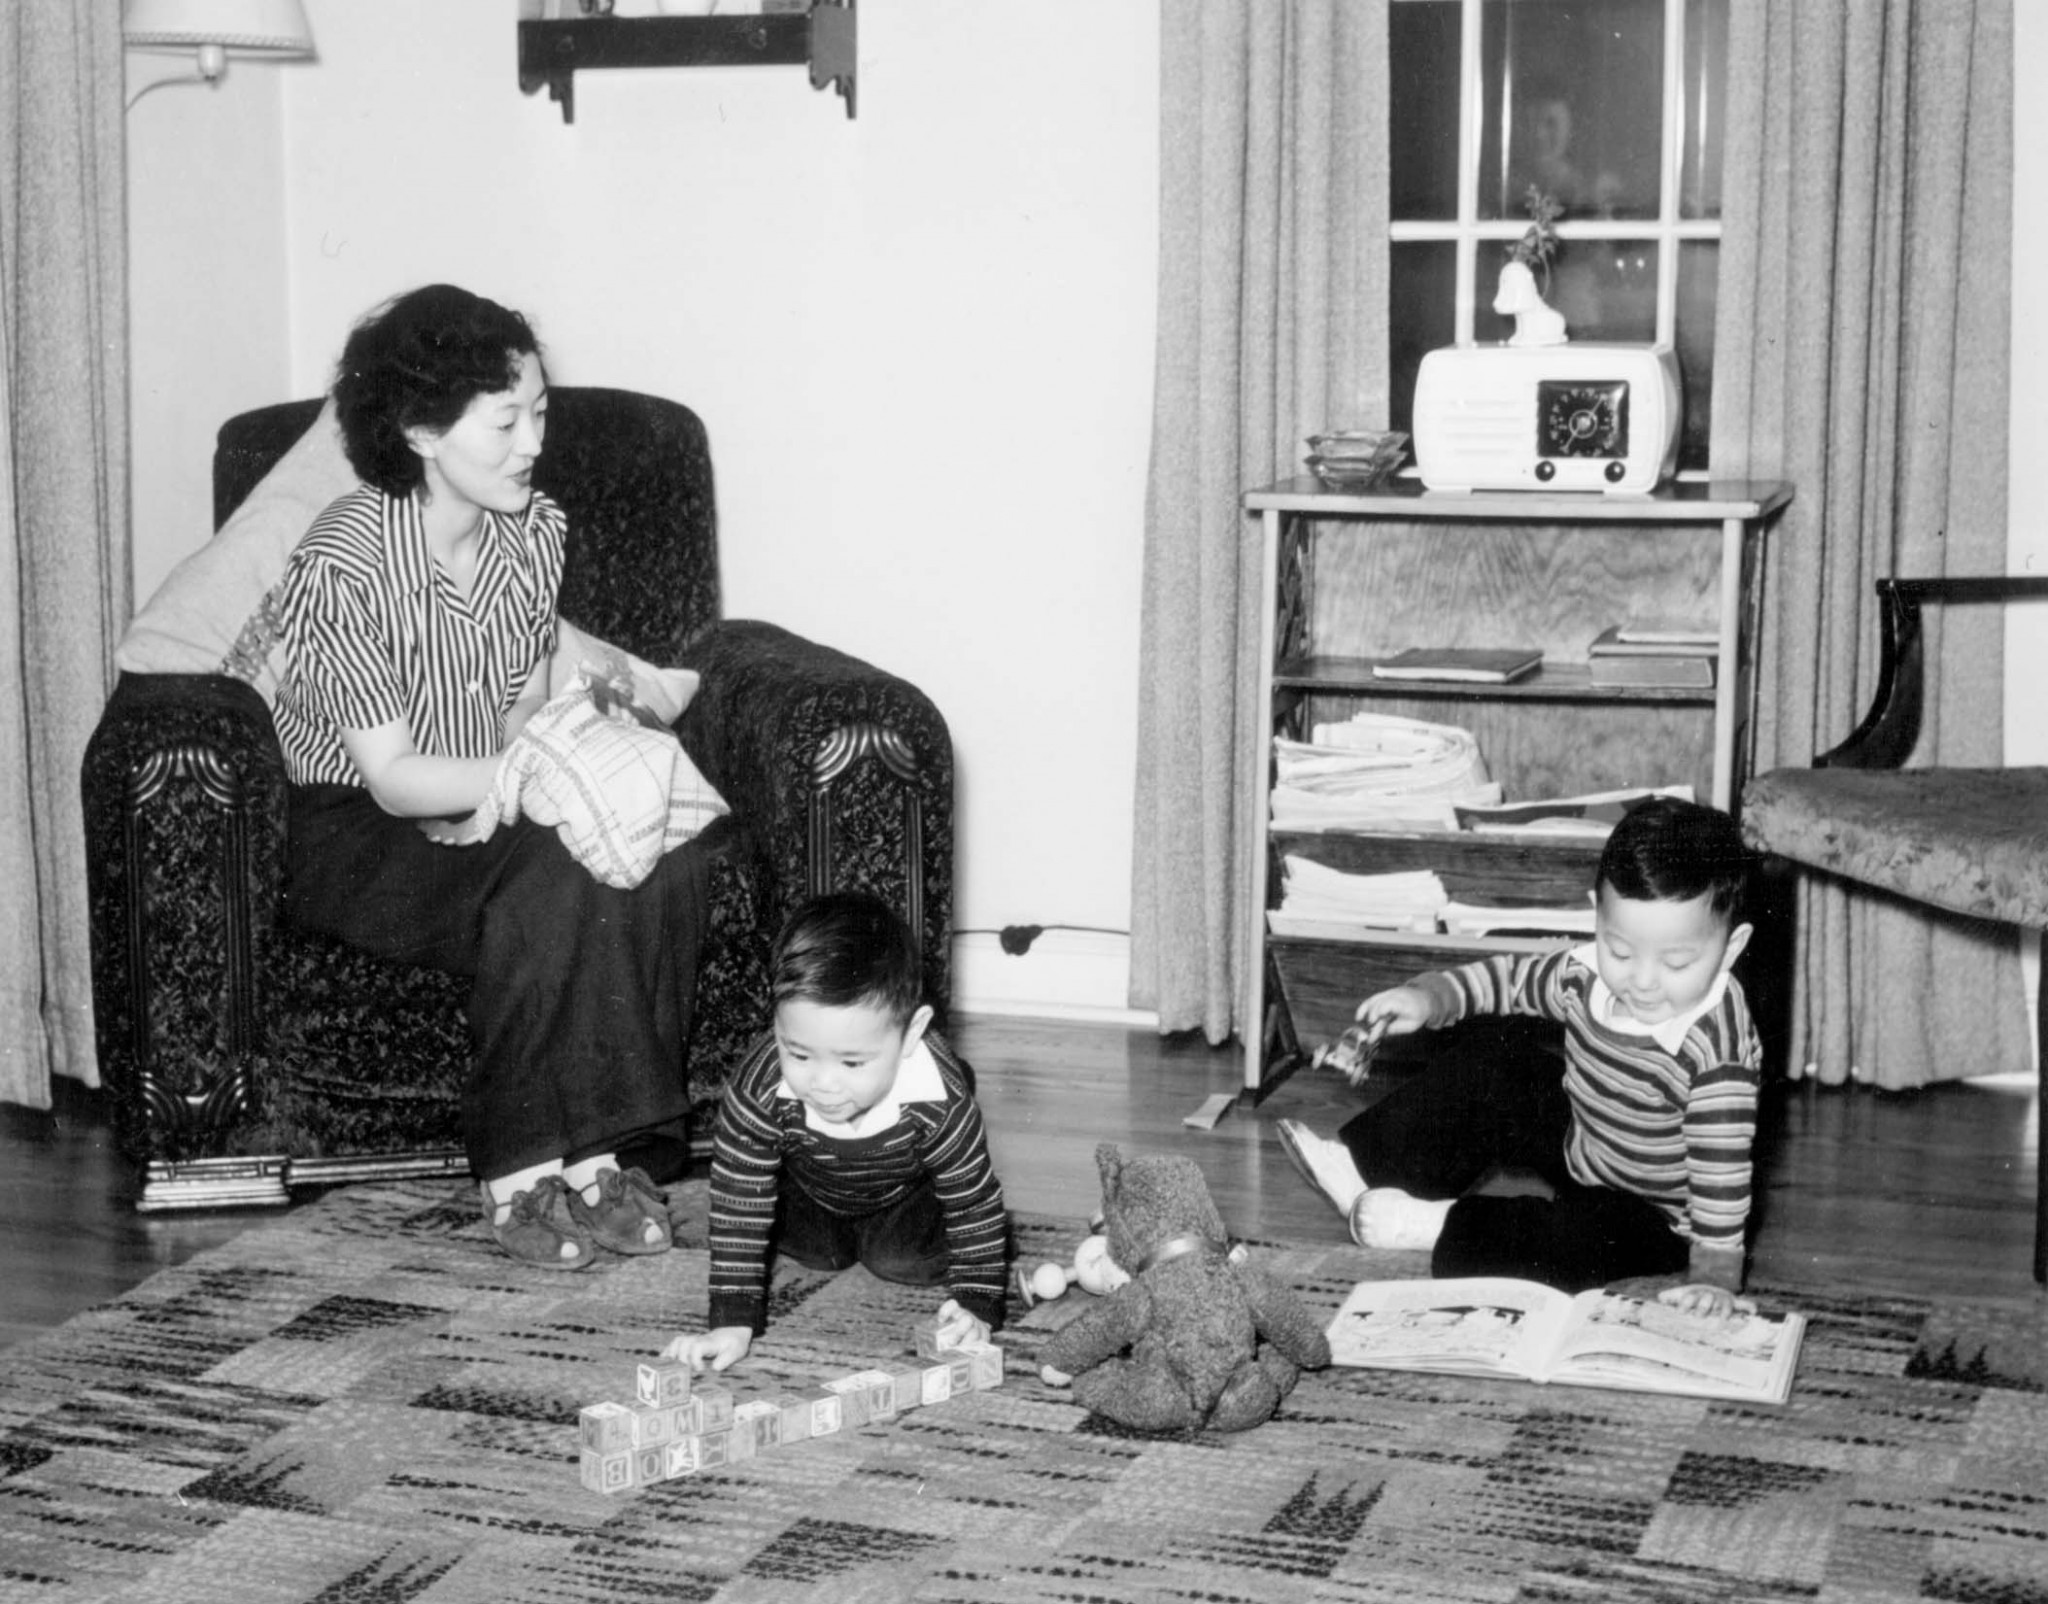 Photograph of a japanese american woman sitting on a sofa in the interior of her home, while two small boys are playing blocks and reading a book on the carpeted floor.